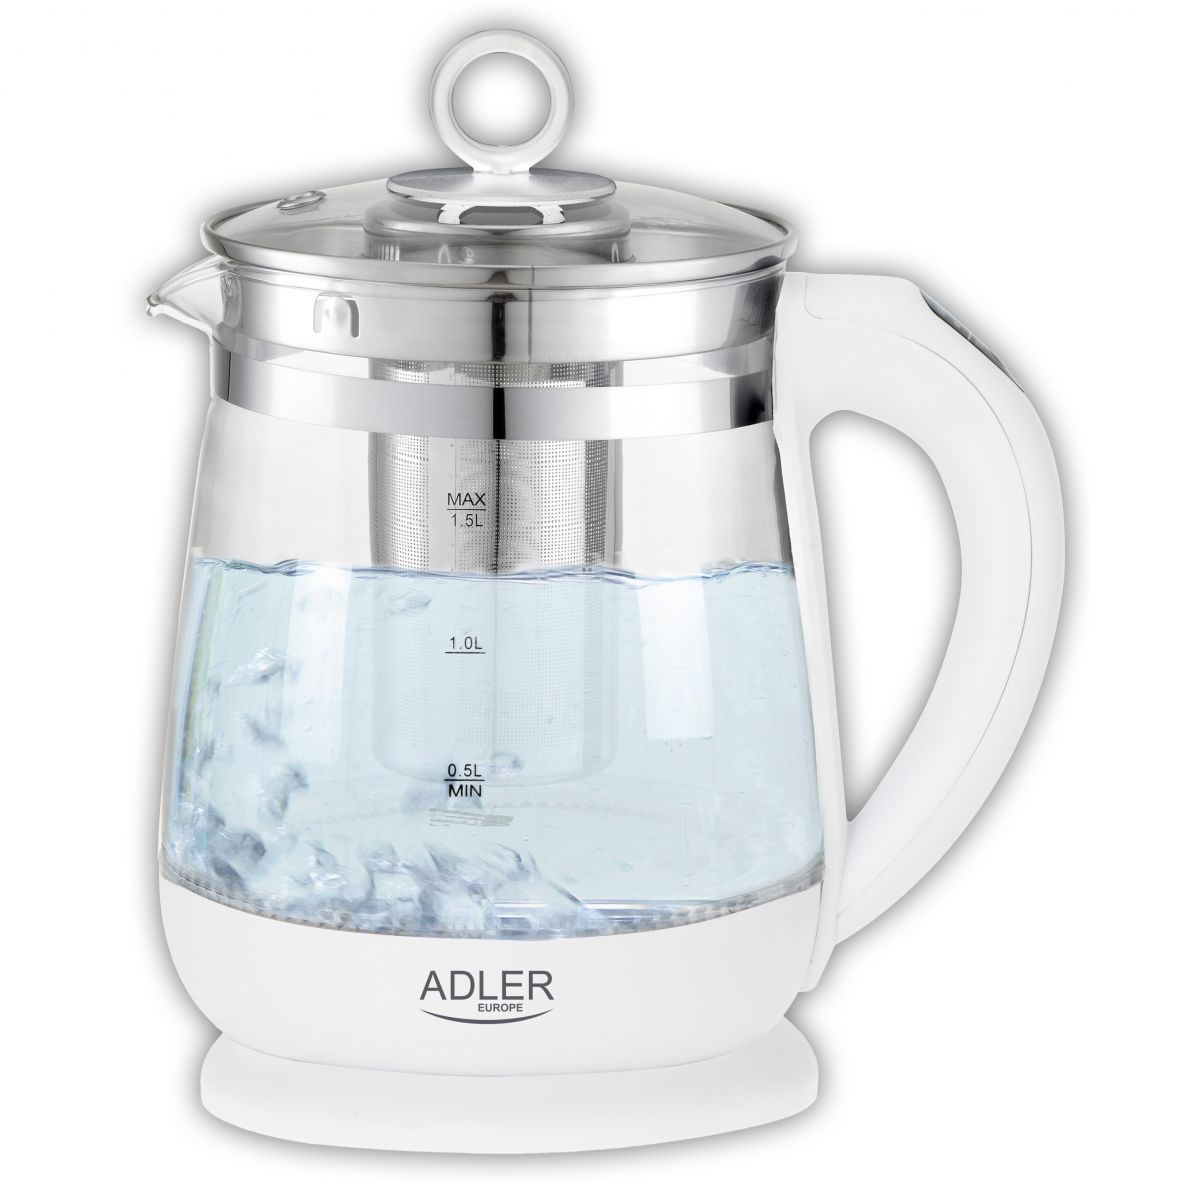 Adler AD 1299 Kettle glass 1,5 l – with temp. control and tea infuser